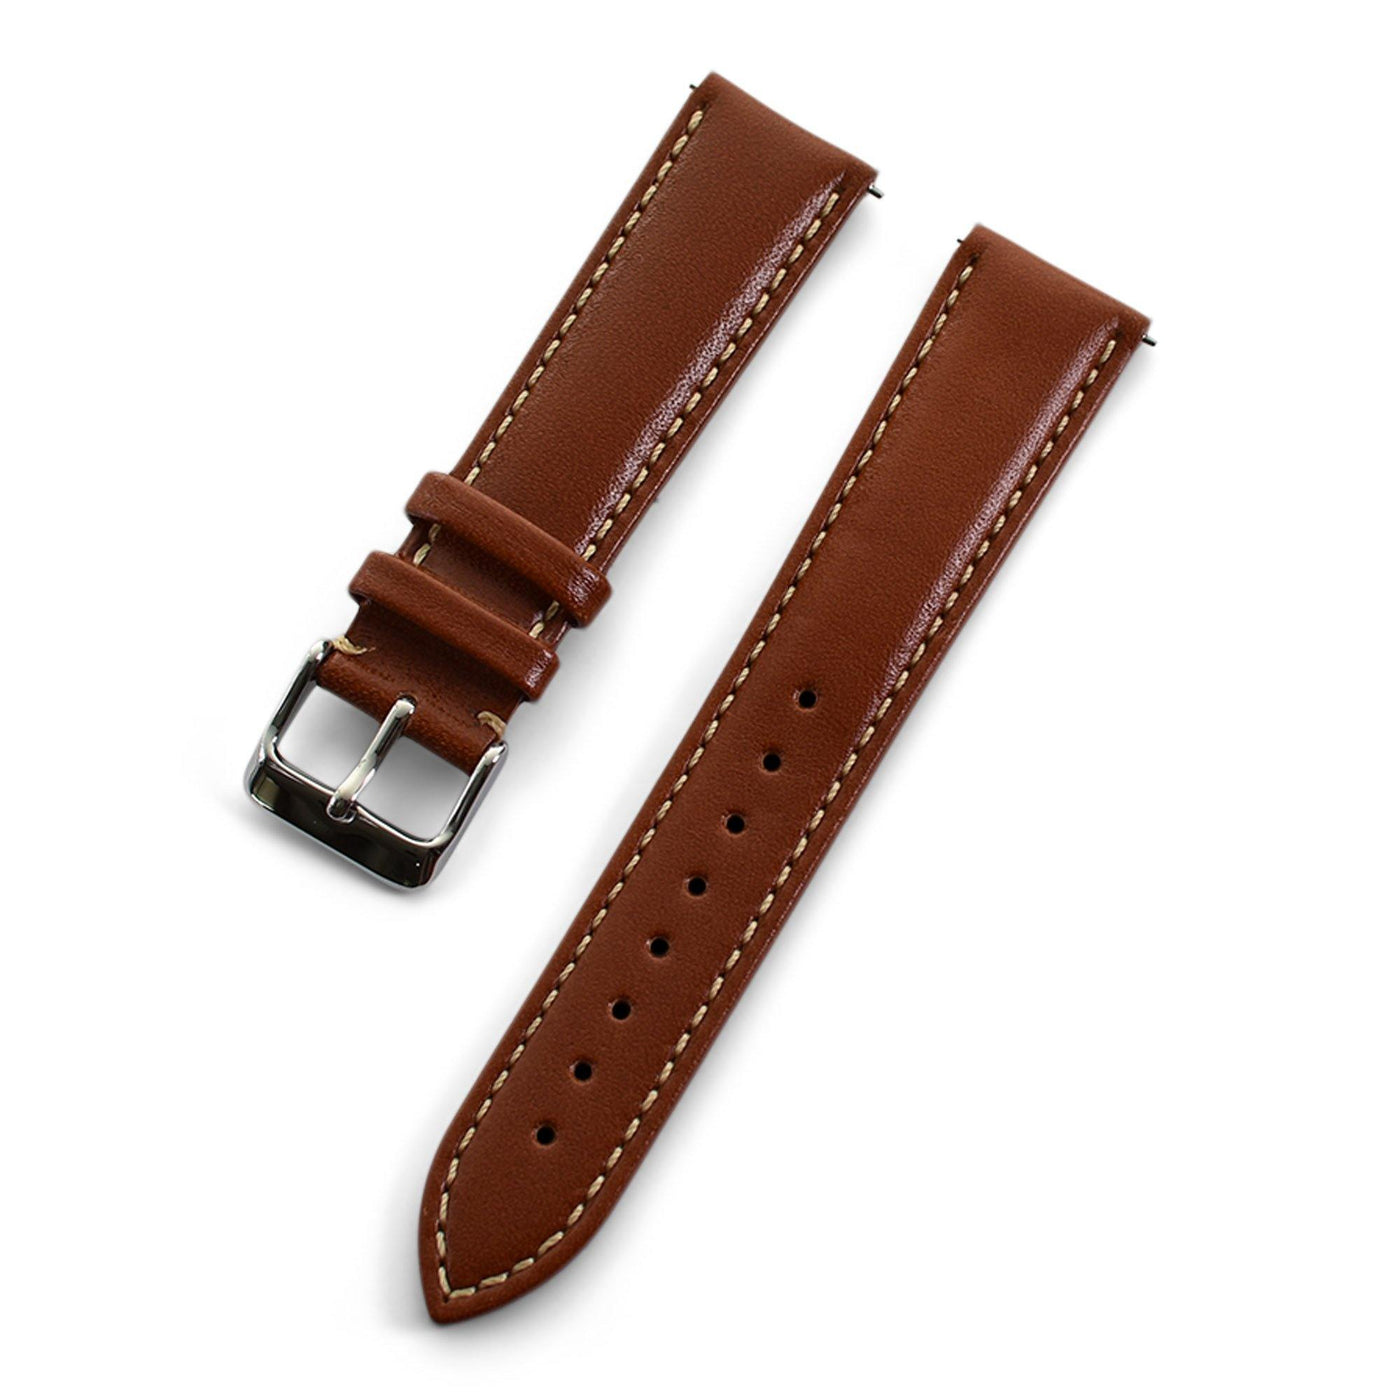 THE CHELSEA QUICK RELEASE LIGHT BROWN - The Sydney Strap Co.